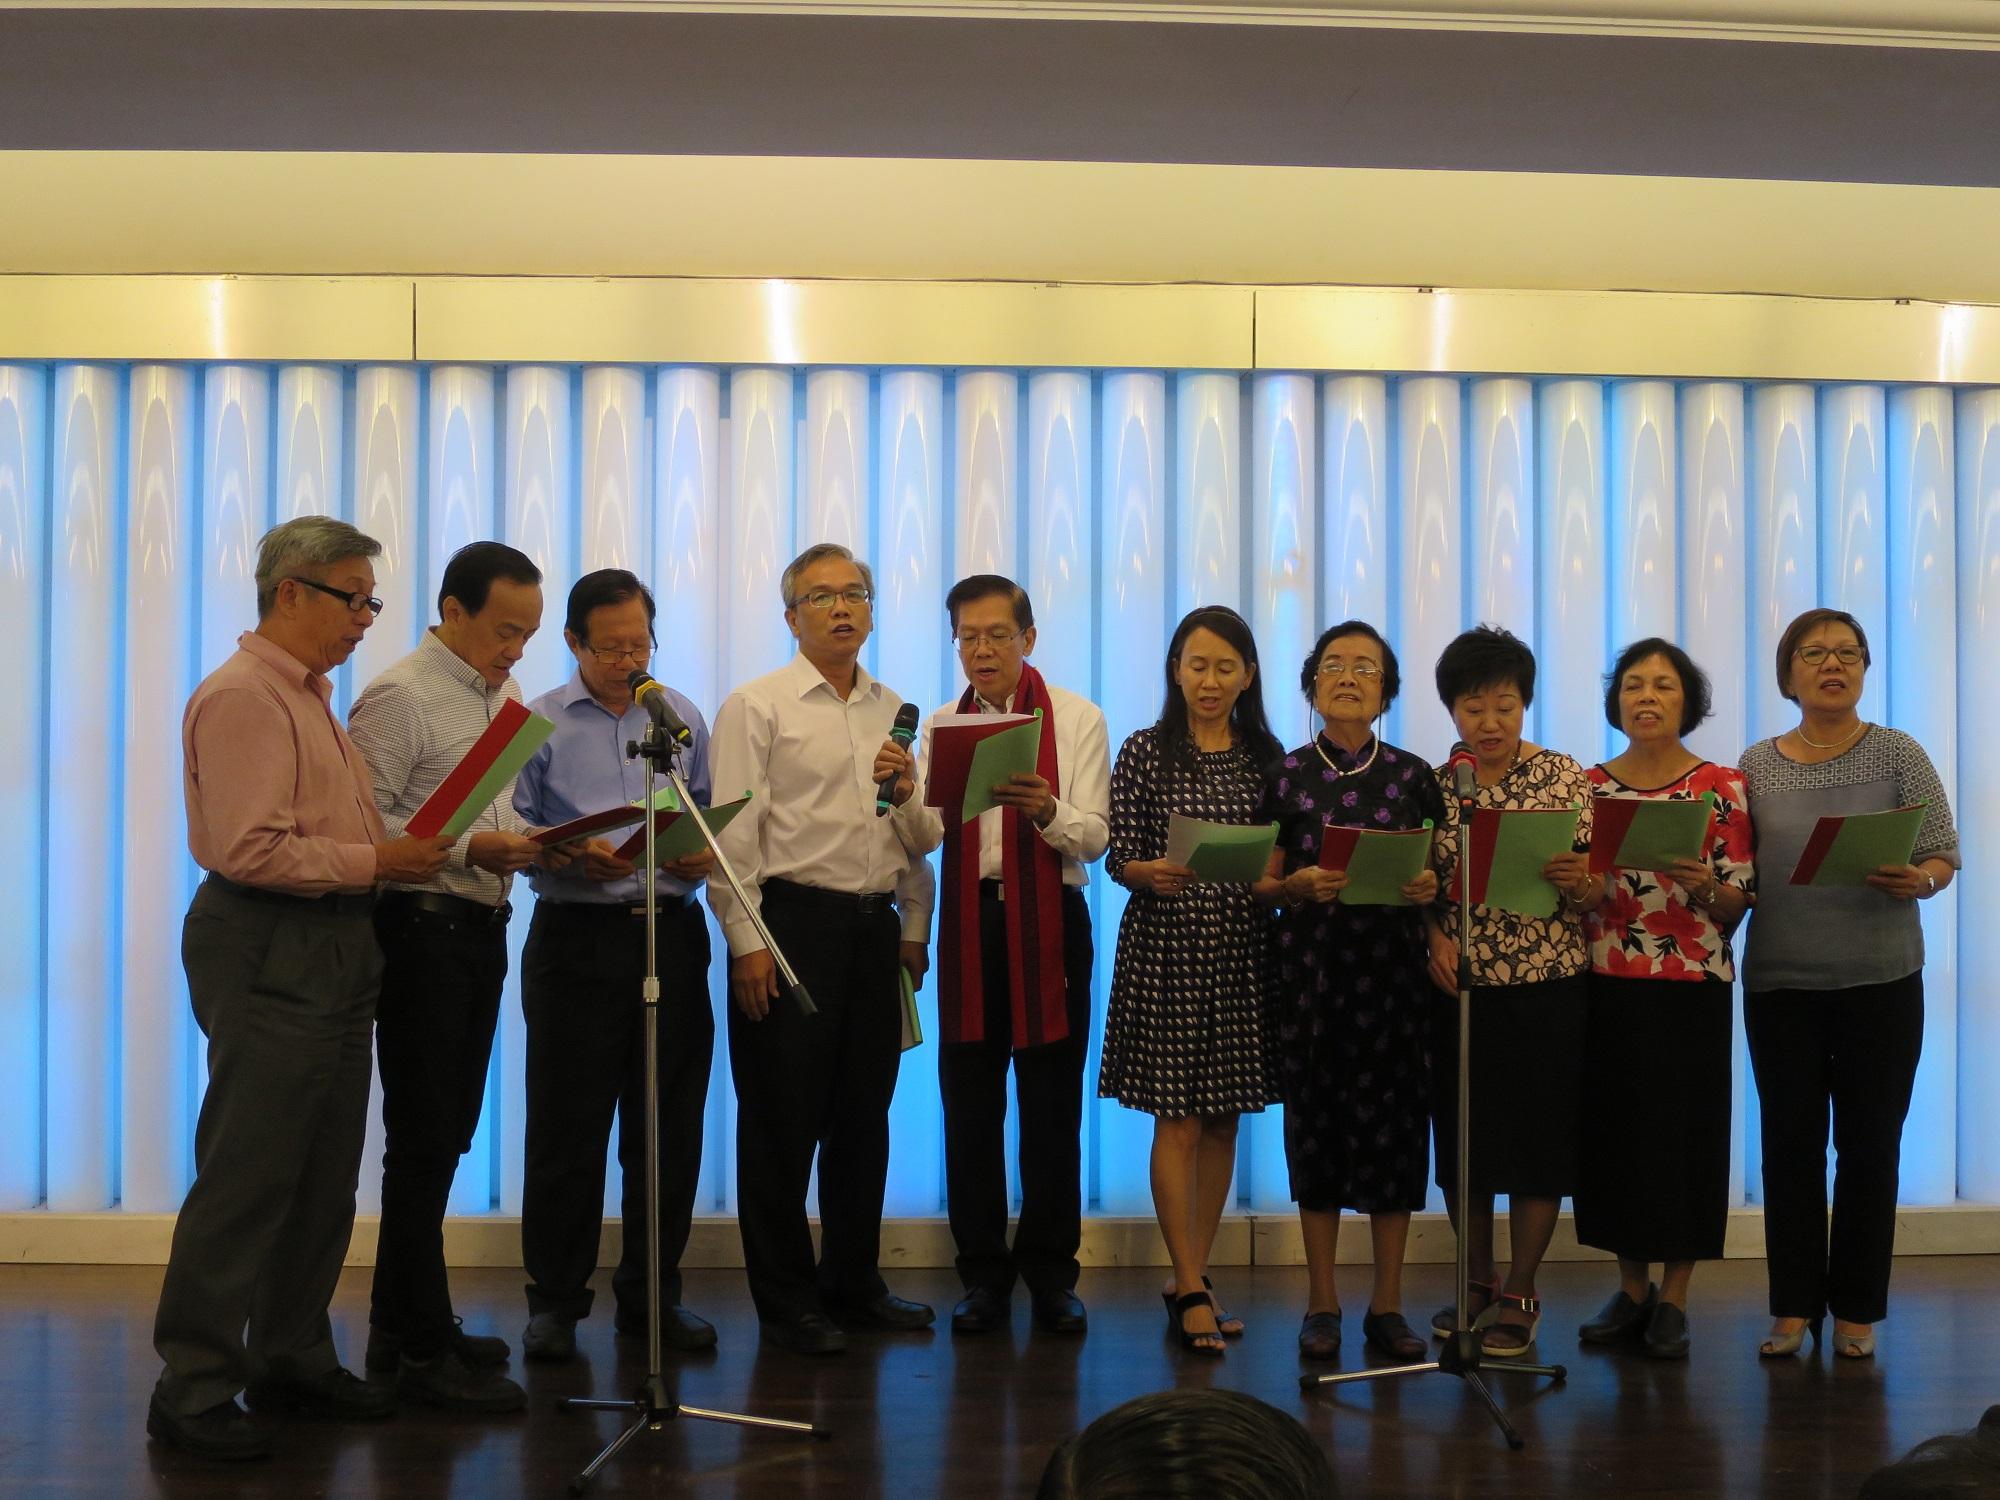 Performance by Xin Sheng Poets Society, whose oldest member is 84 years old, at ATUC Singapore’s 38th Anniversary Dinner. 